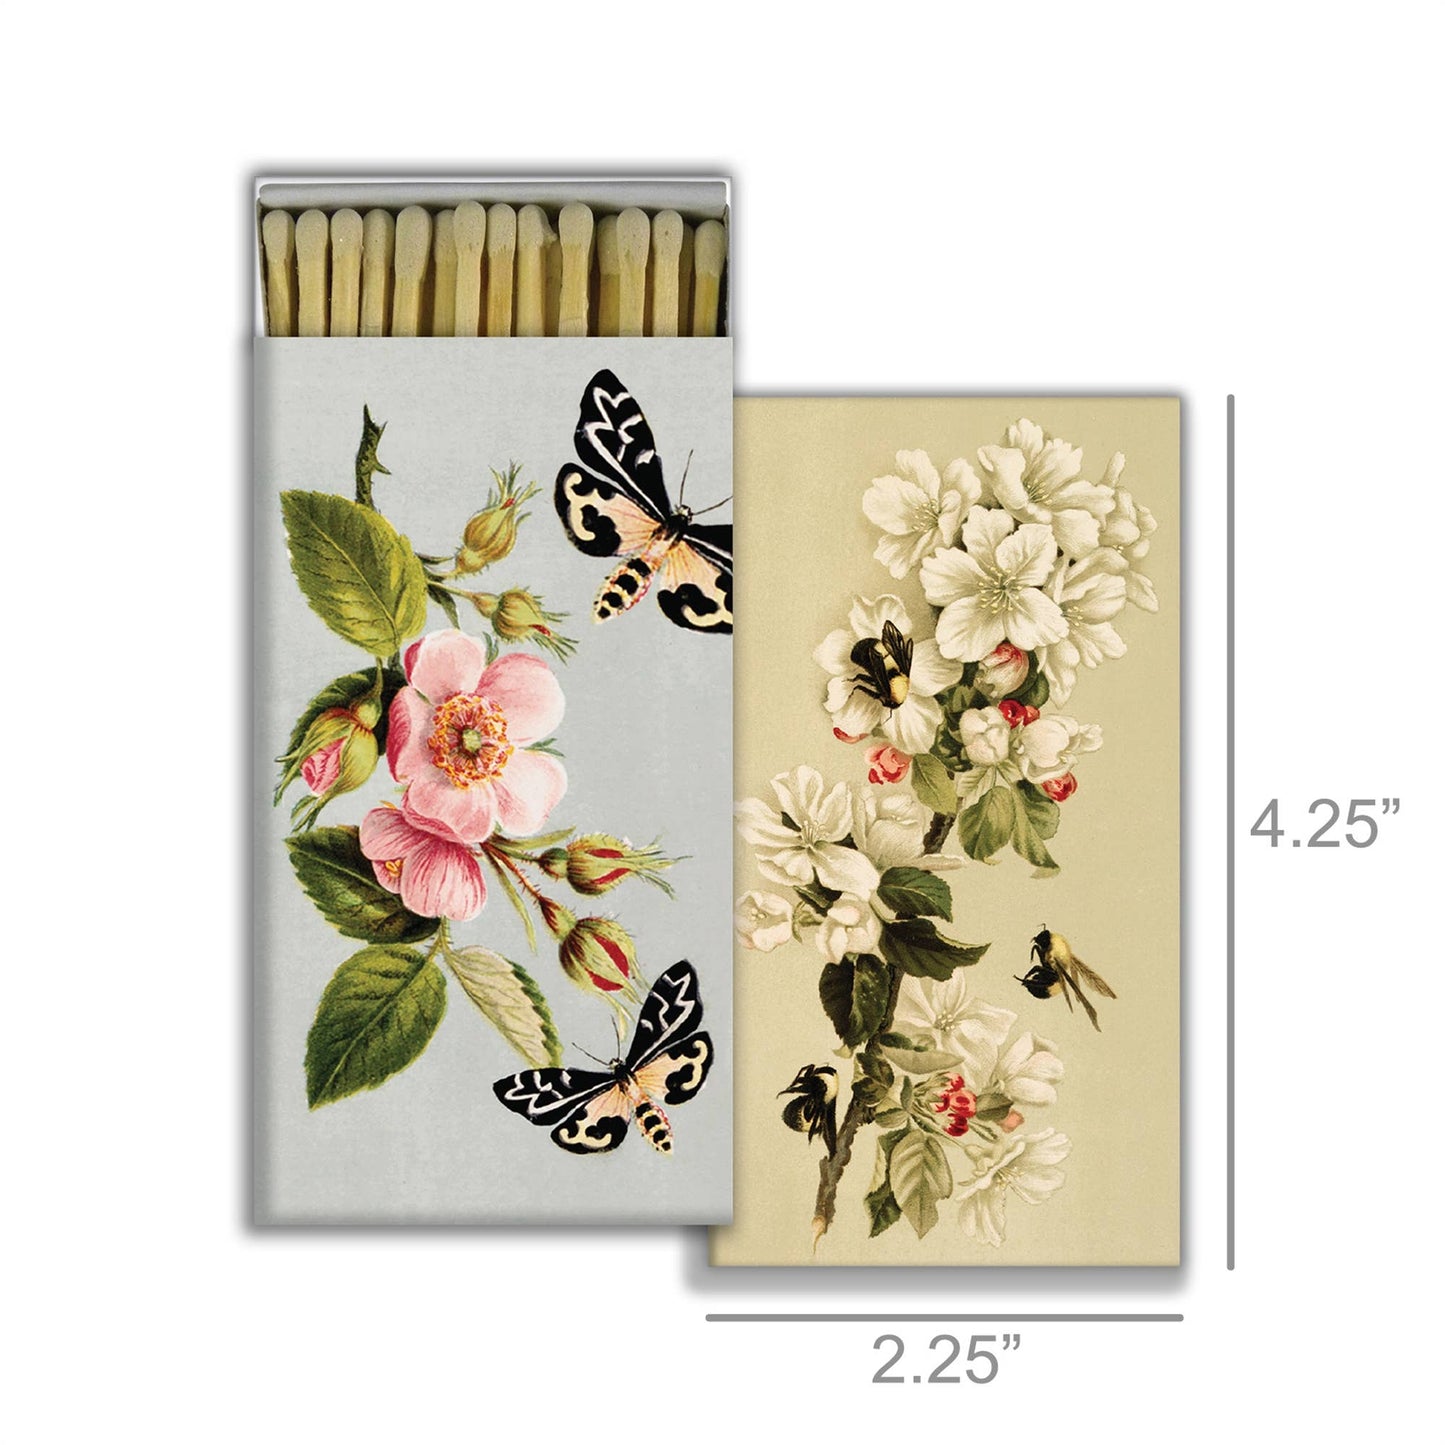 Matches - Insects and Floral